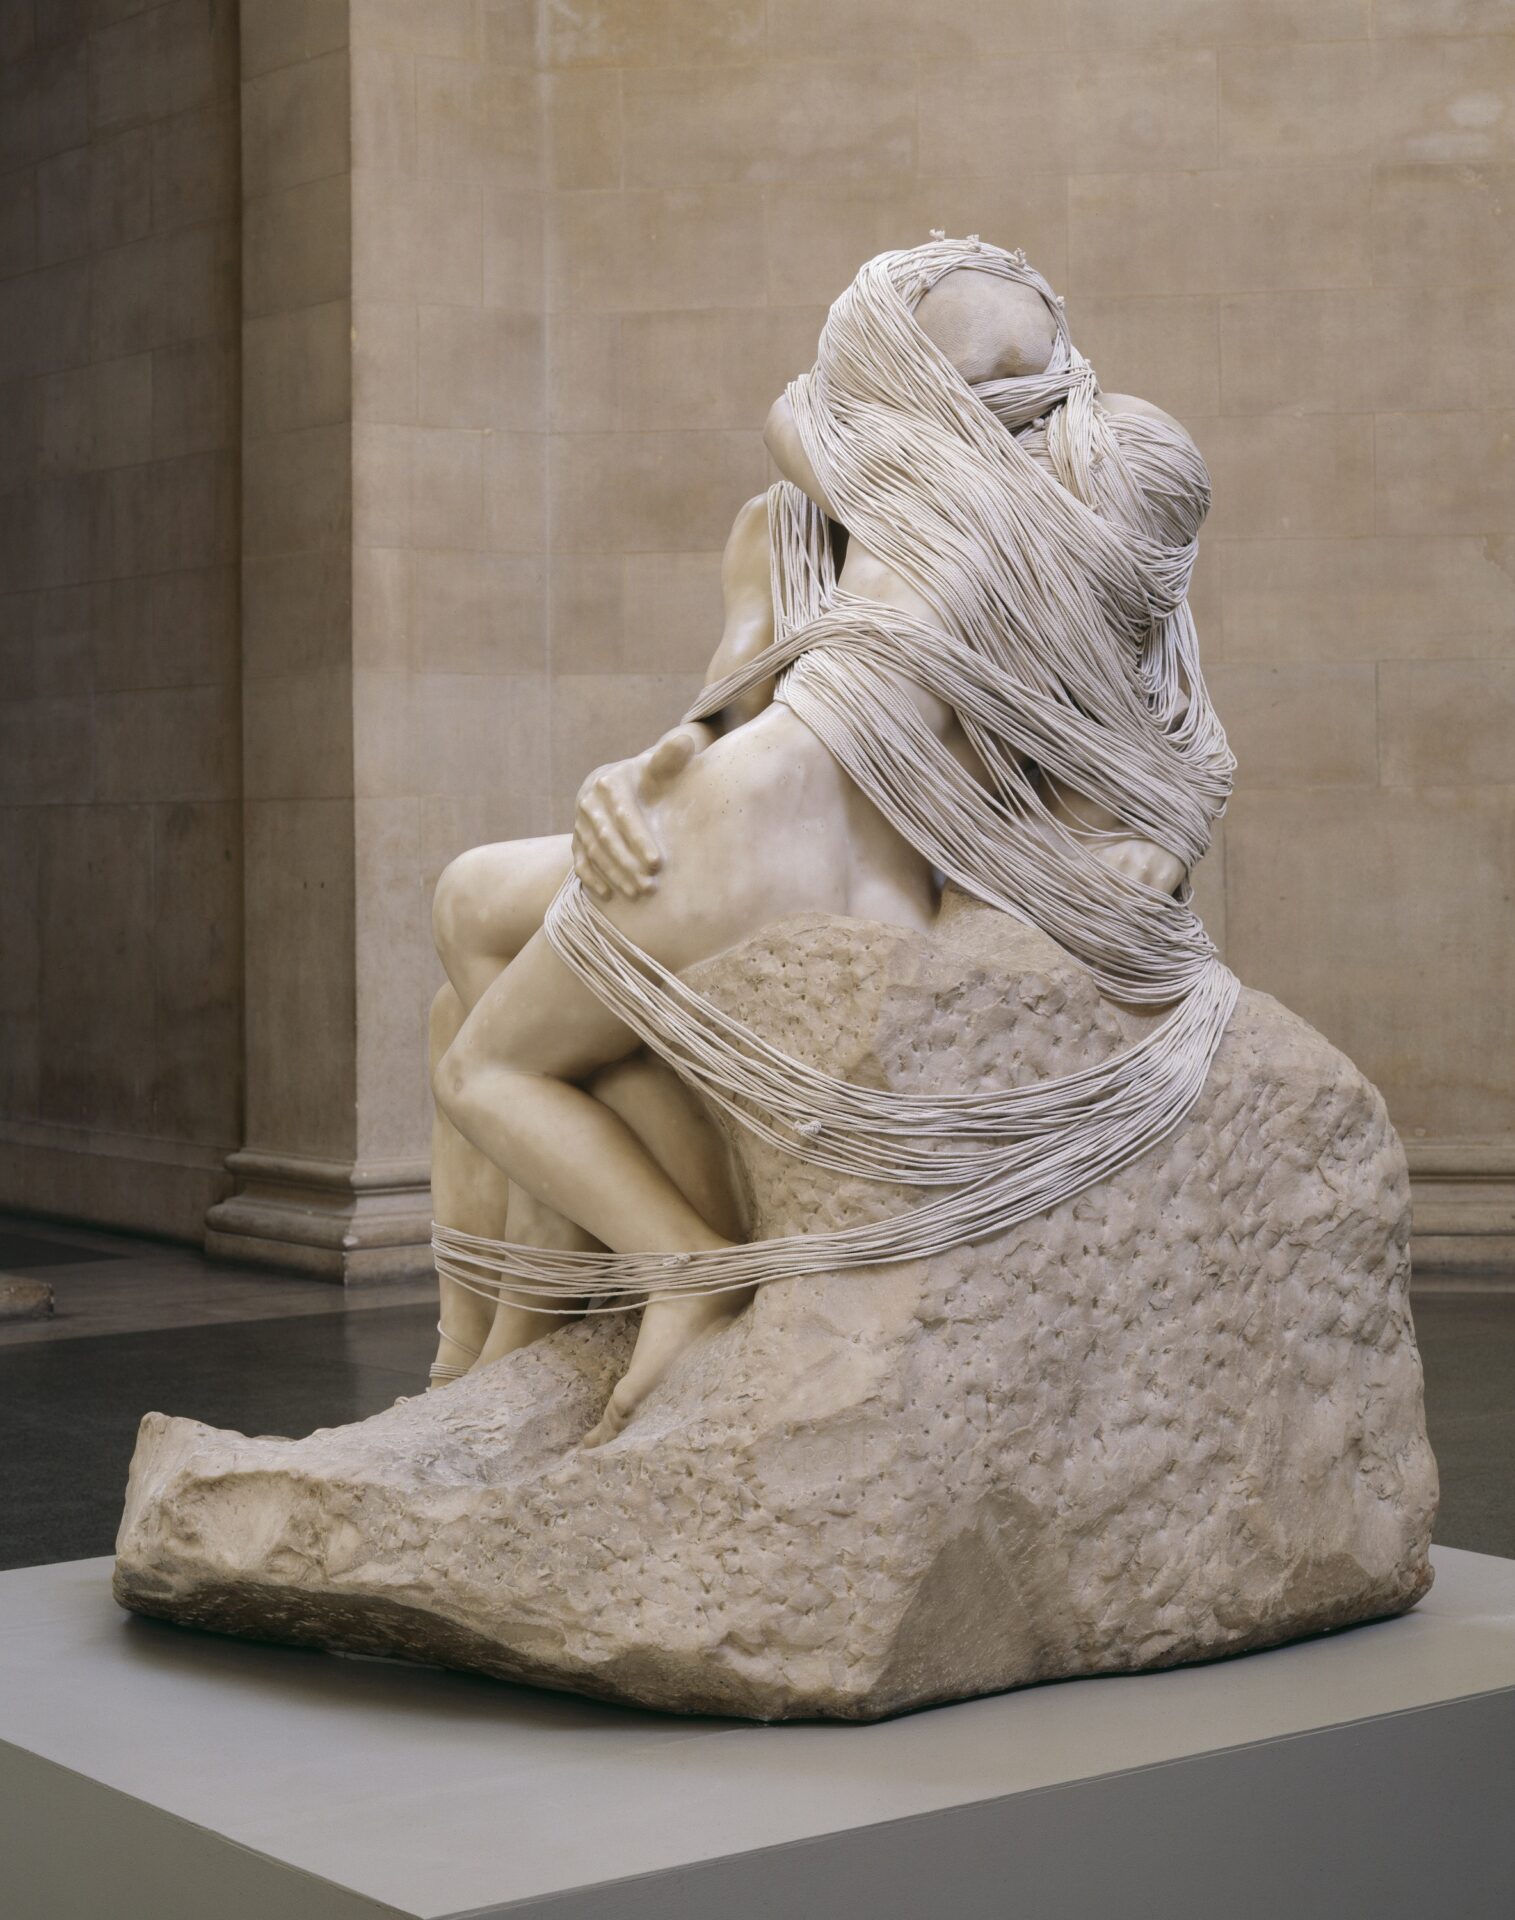 Things to do in London this month | A stone statue of two figures kissing, their faces obscured but string wound around them